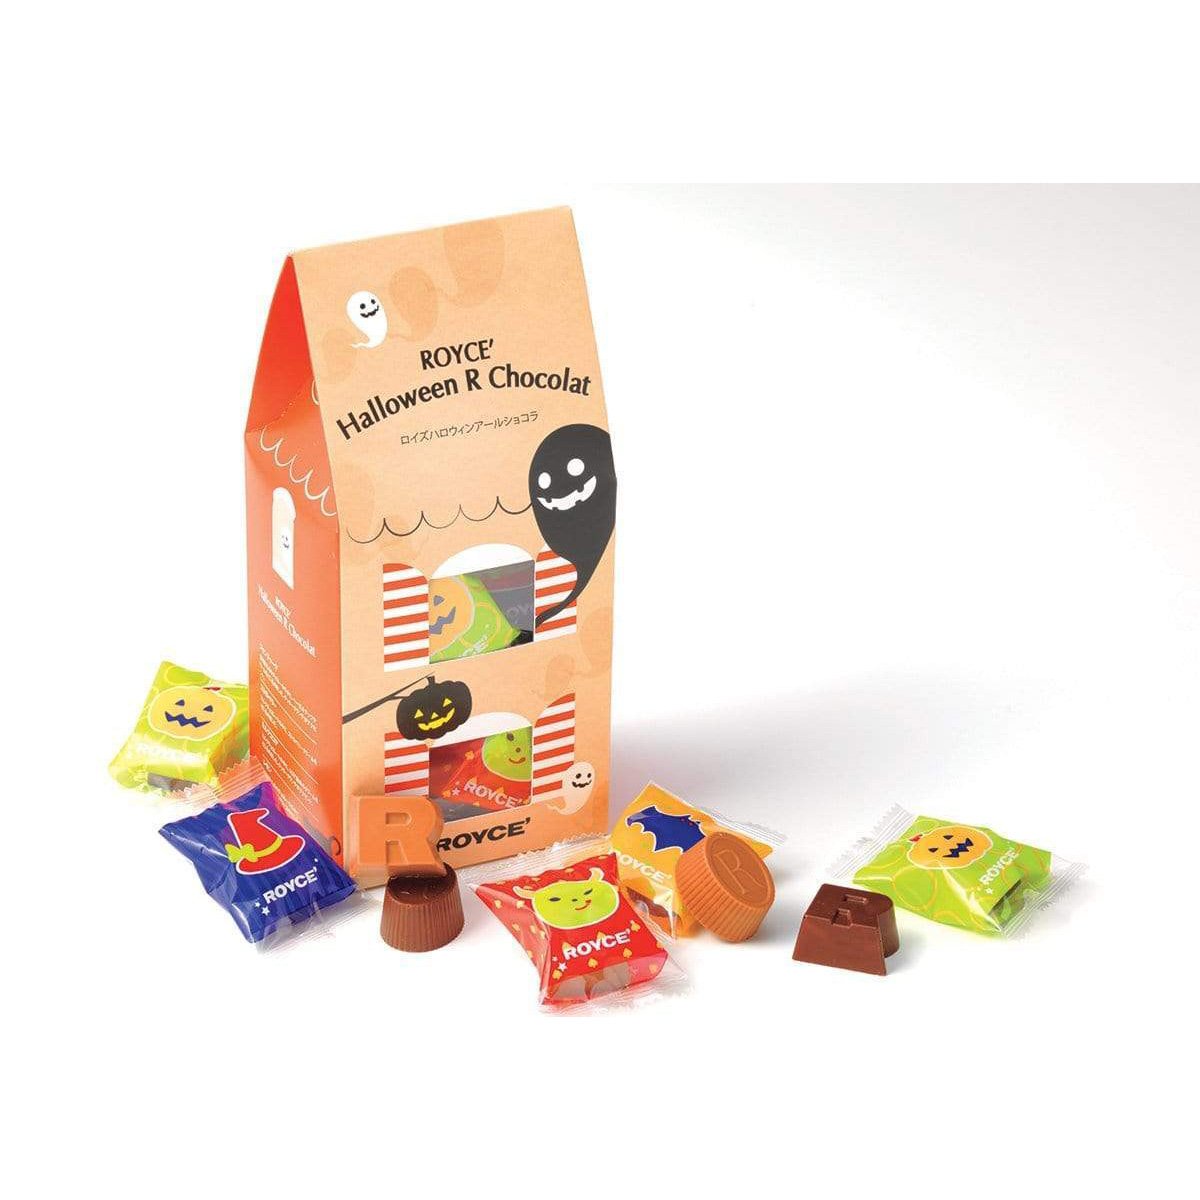 Image shows a box in orange and light brown colors with illustrations of ghosts and pumpkins. Text says ROYCE' Halloween R Chocolat ROYCE'. Accents include R-shaped and oval-shaped chocolates in hues of brown, candy wrappers in red, green, blue, and yellow with prints of pumpkins, ghouls, and a bat. Background is in white.